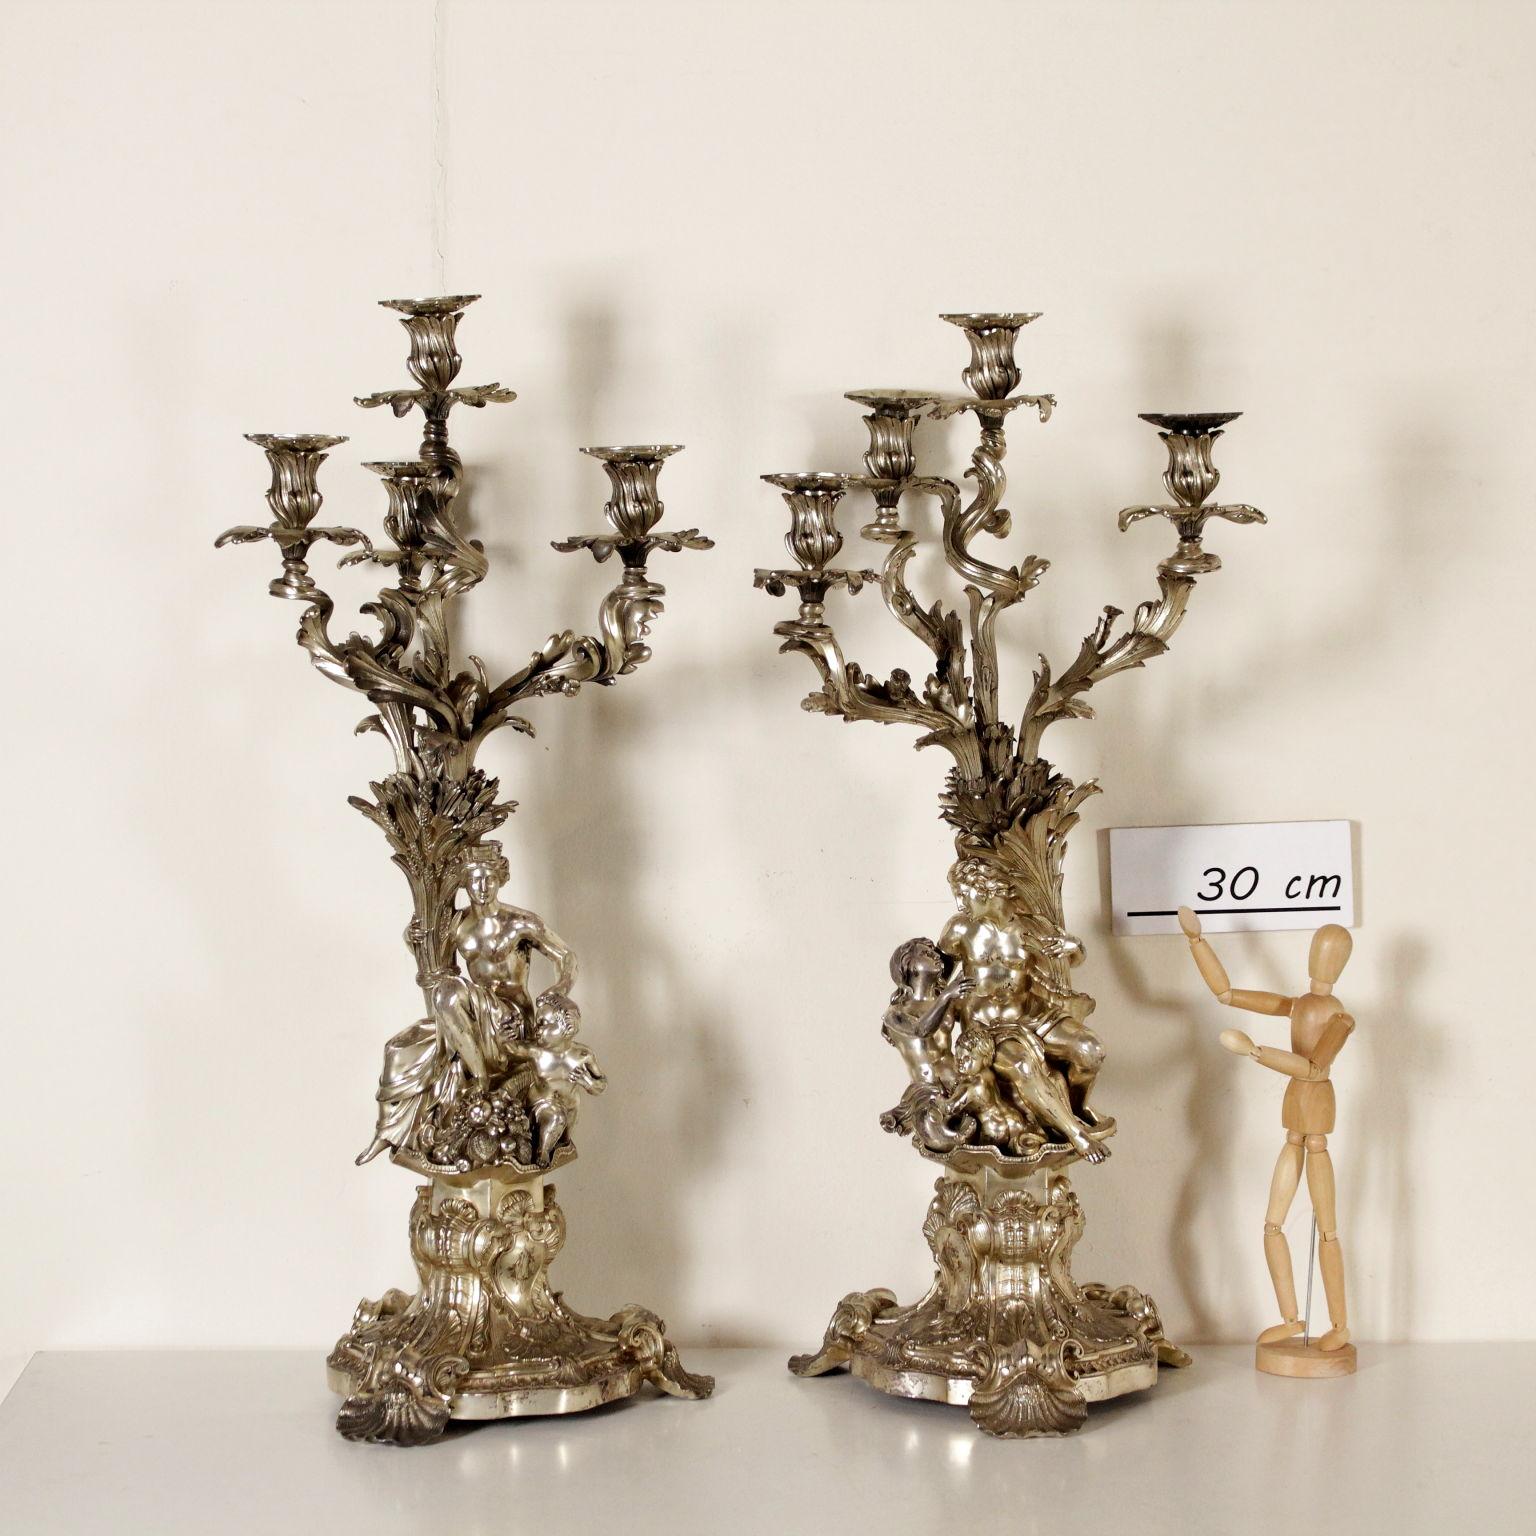 A pair of silver plated bronze candlesticks, finely chiseled. The pair of candlesticks has a Late Baroque base with three feet shaped like shells and coats of arms with the engraved initials CM. A pair of compositions on the bases: on the first one,